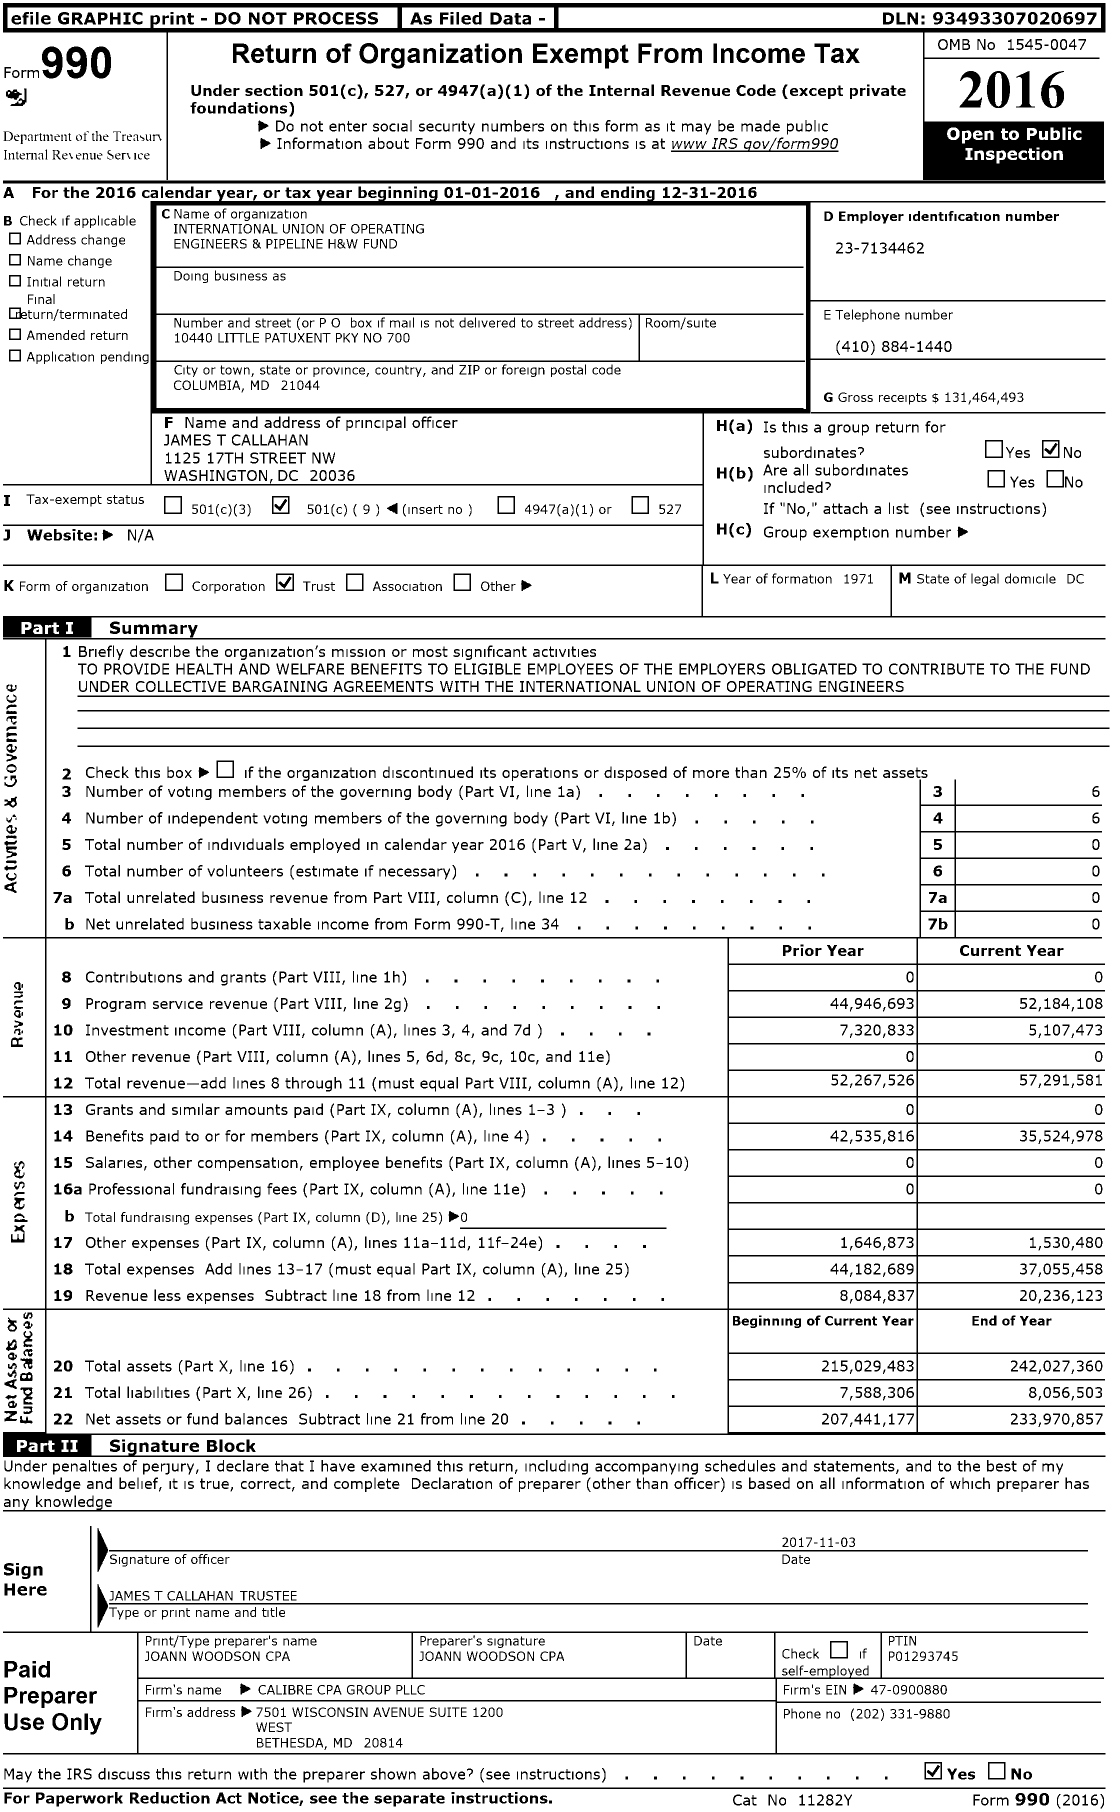 Image of first page of 2016 Form 990O for International Union of Operating Engineers and Pipeline Line Employers H&W Fund